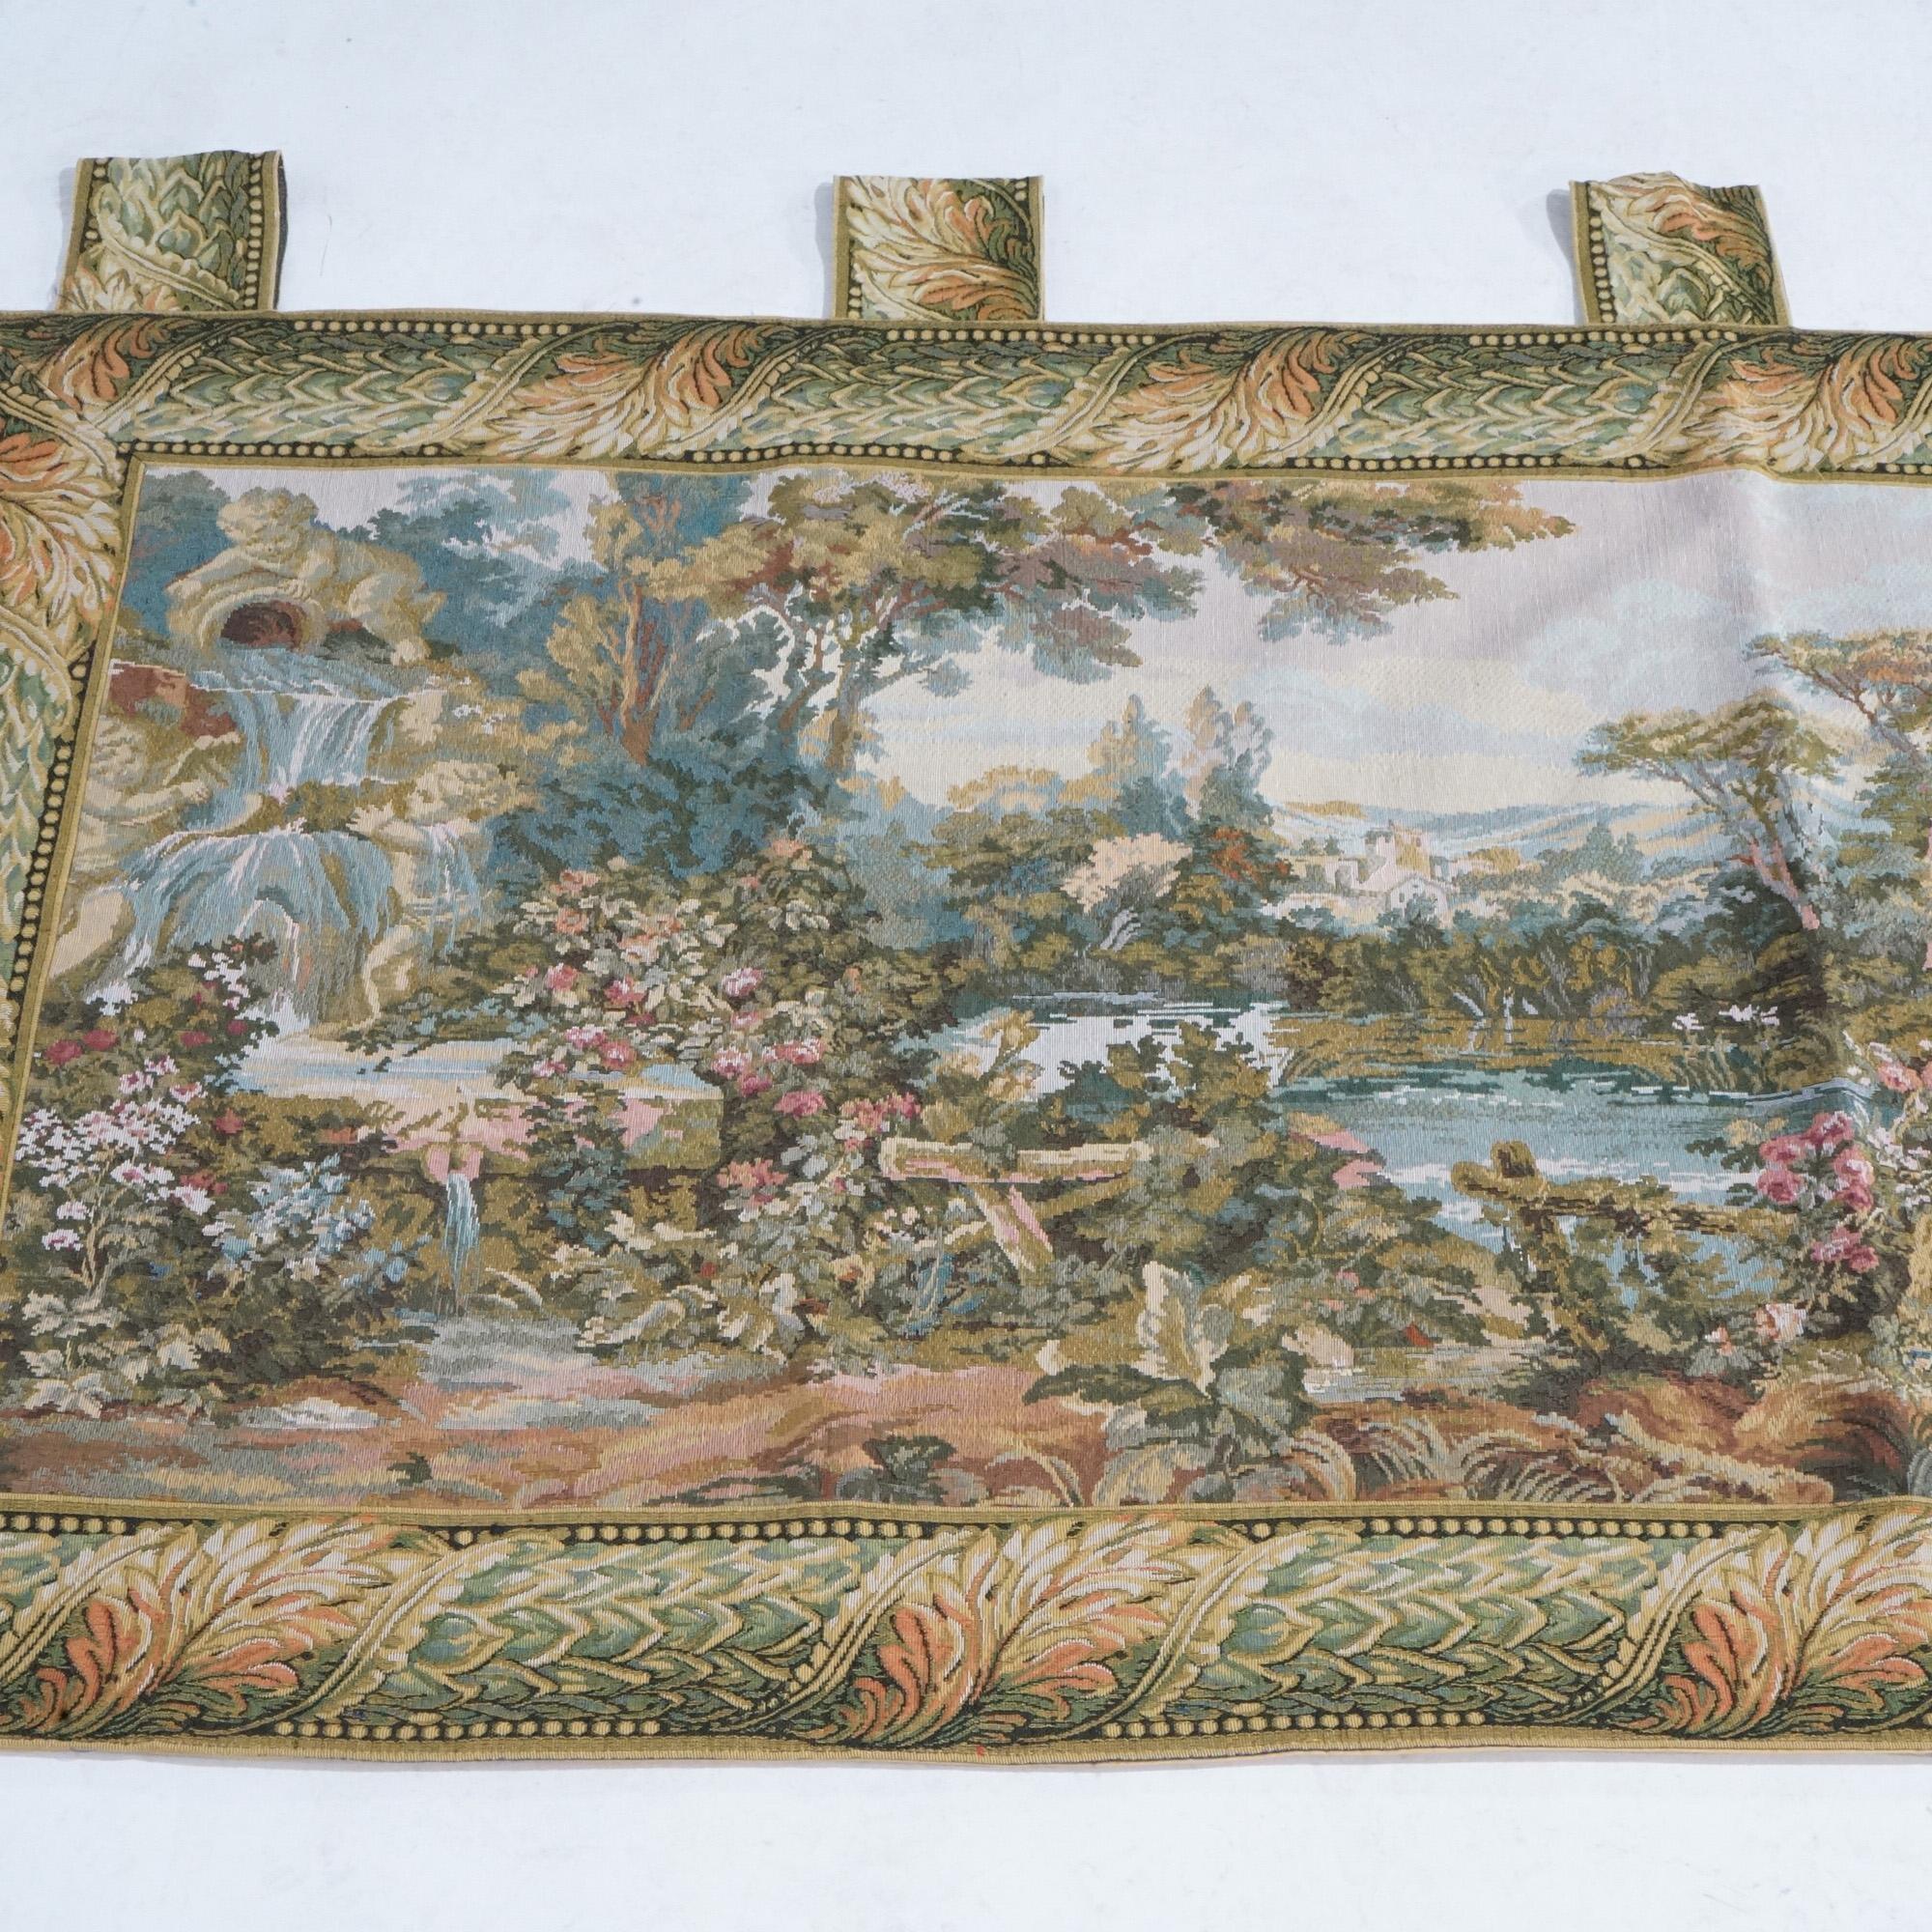 Contemporary Greco-Roman Scenic Countryside Wall Tapestry with Cottage 20th In Good Condition For Sale In Big Flats, NY